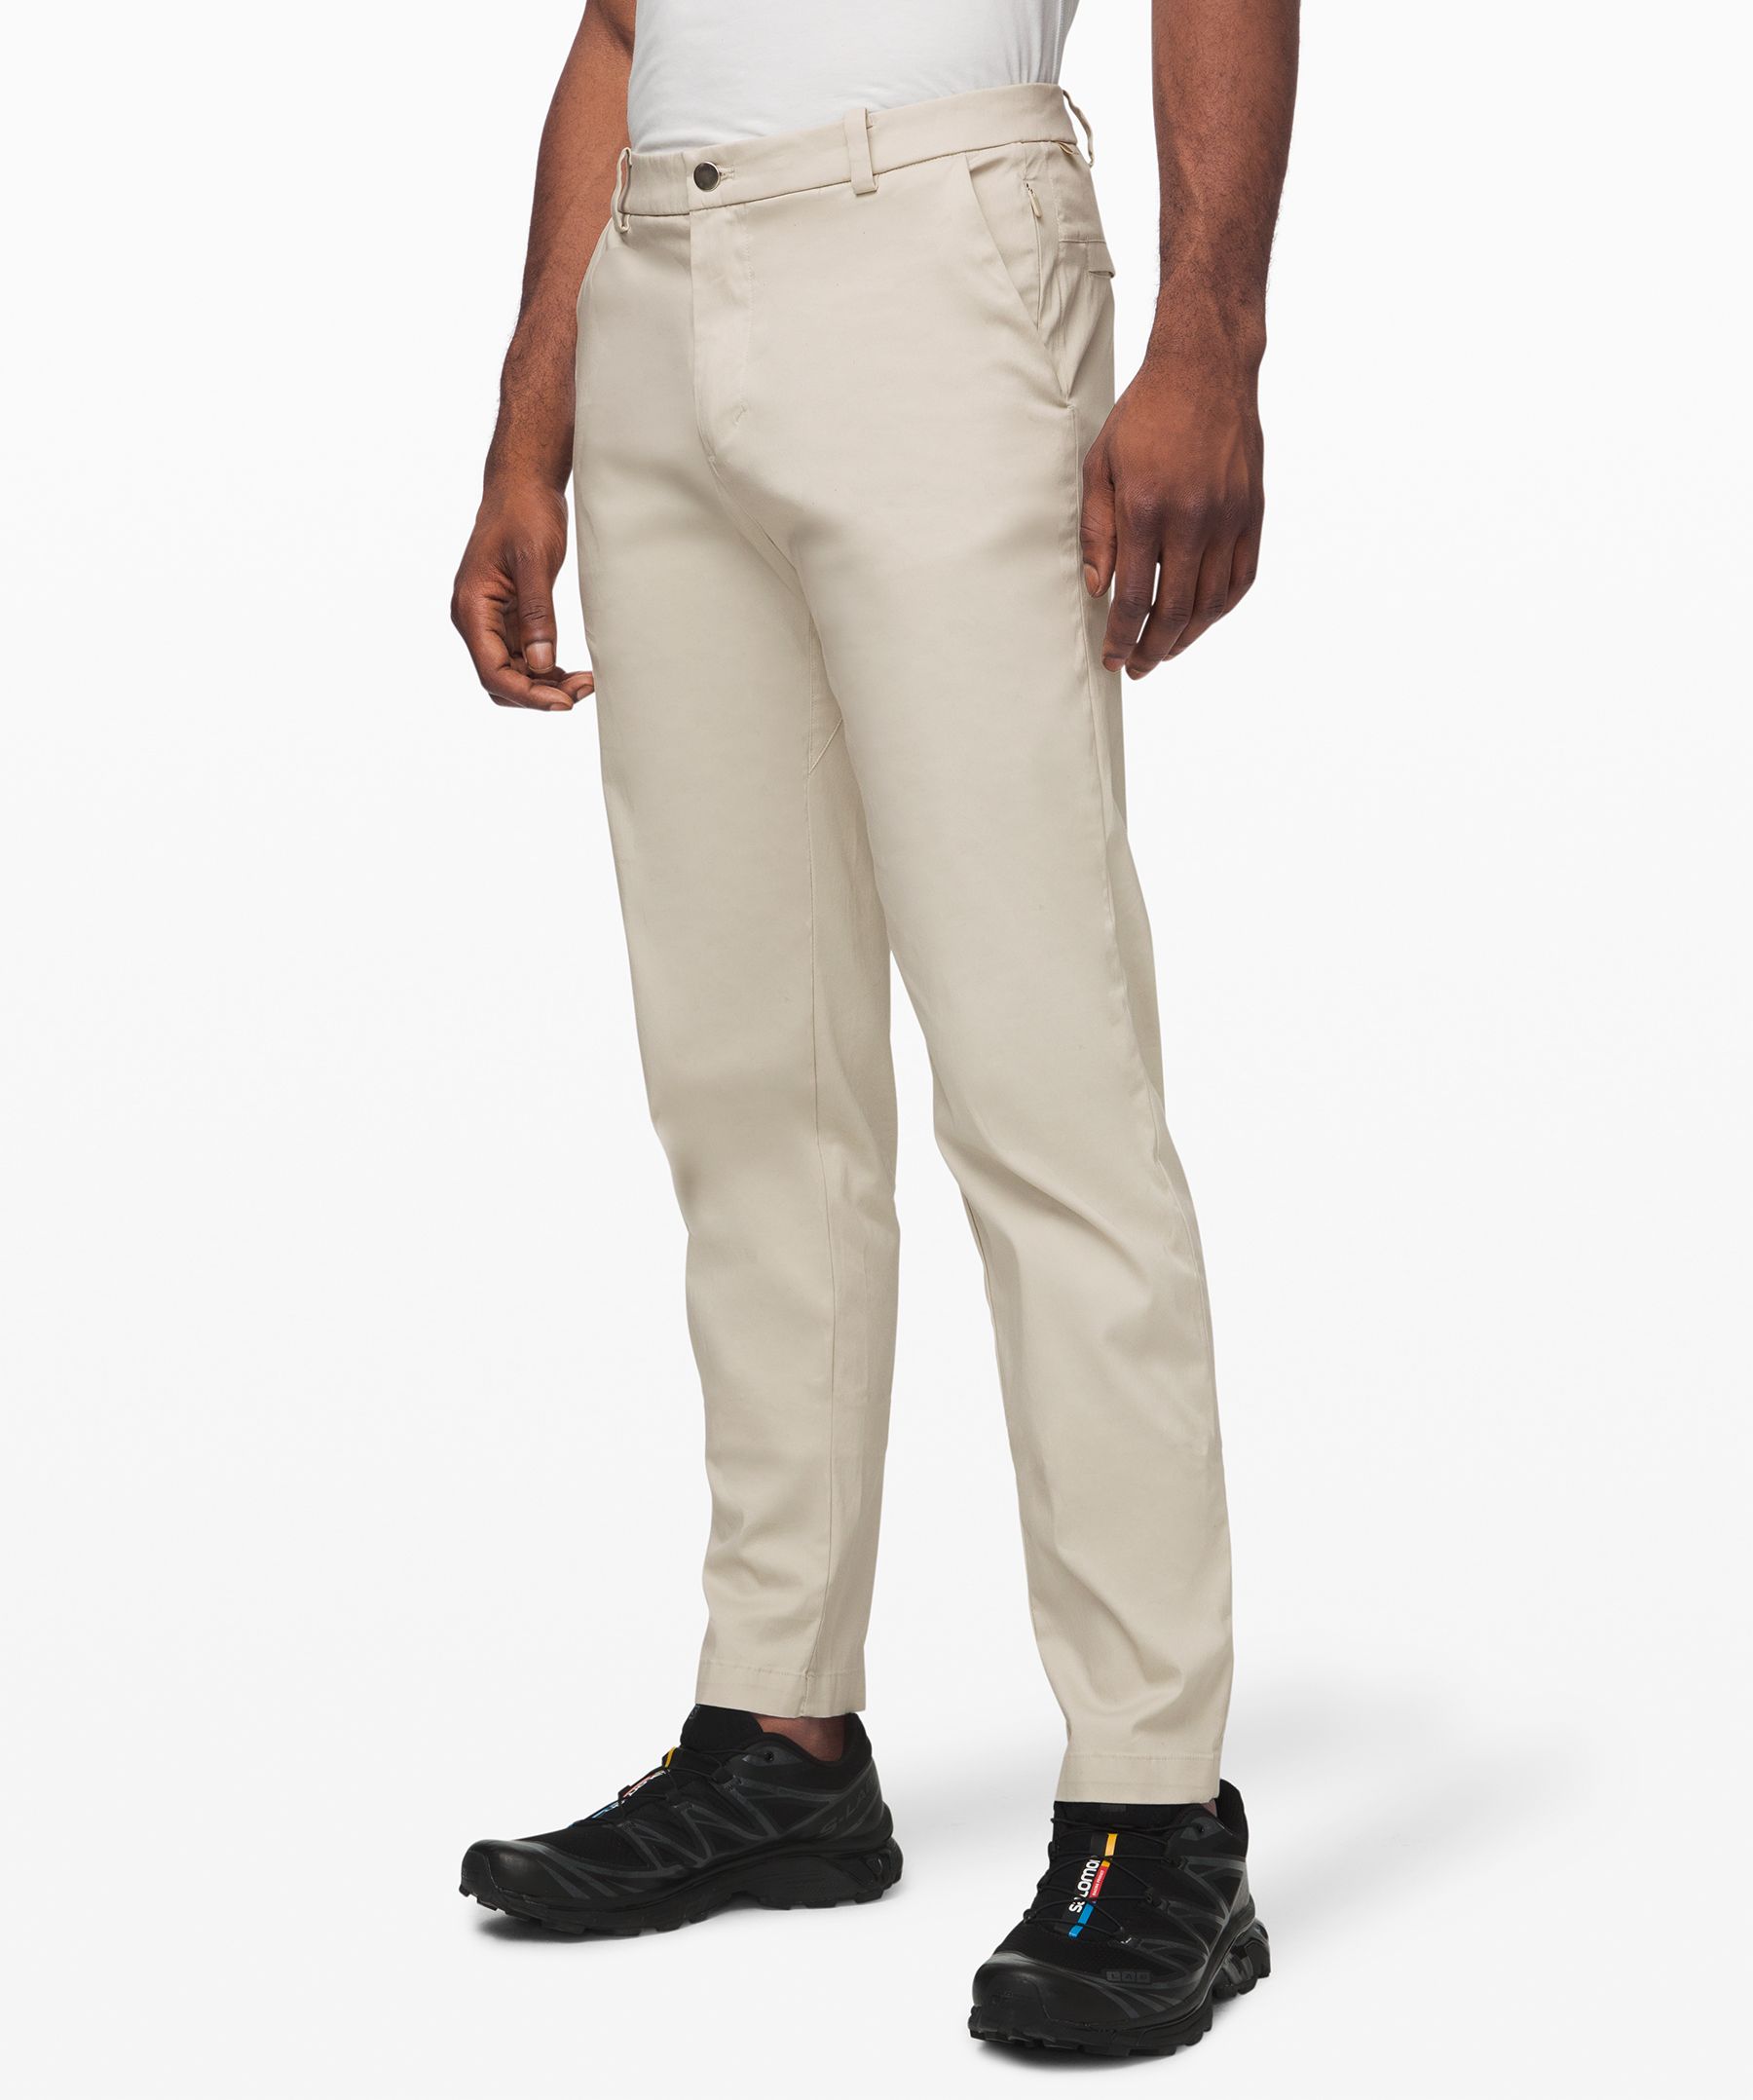 Lulu Commission Pants Review  International Society of Precision  Agriculture